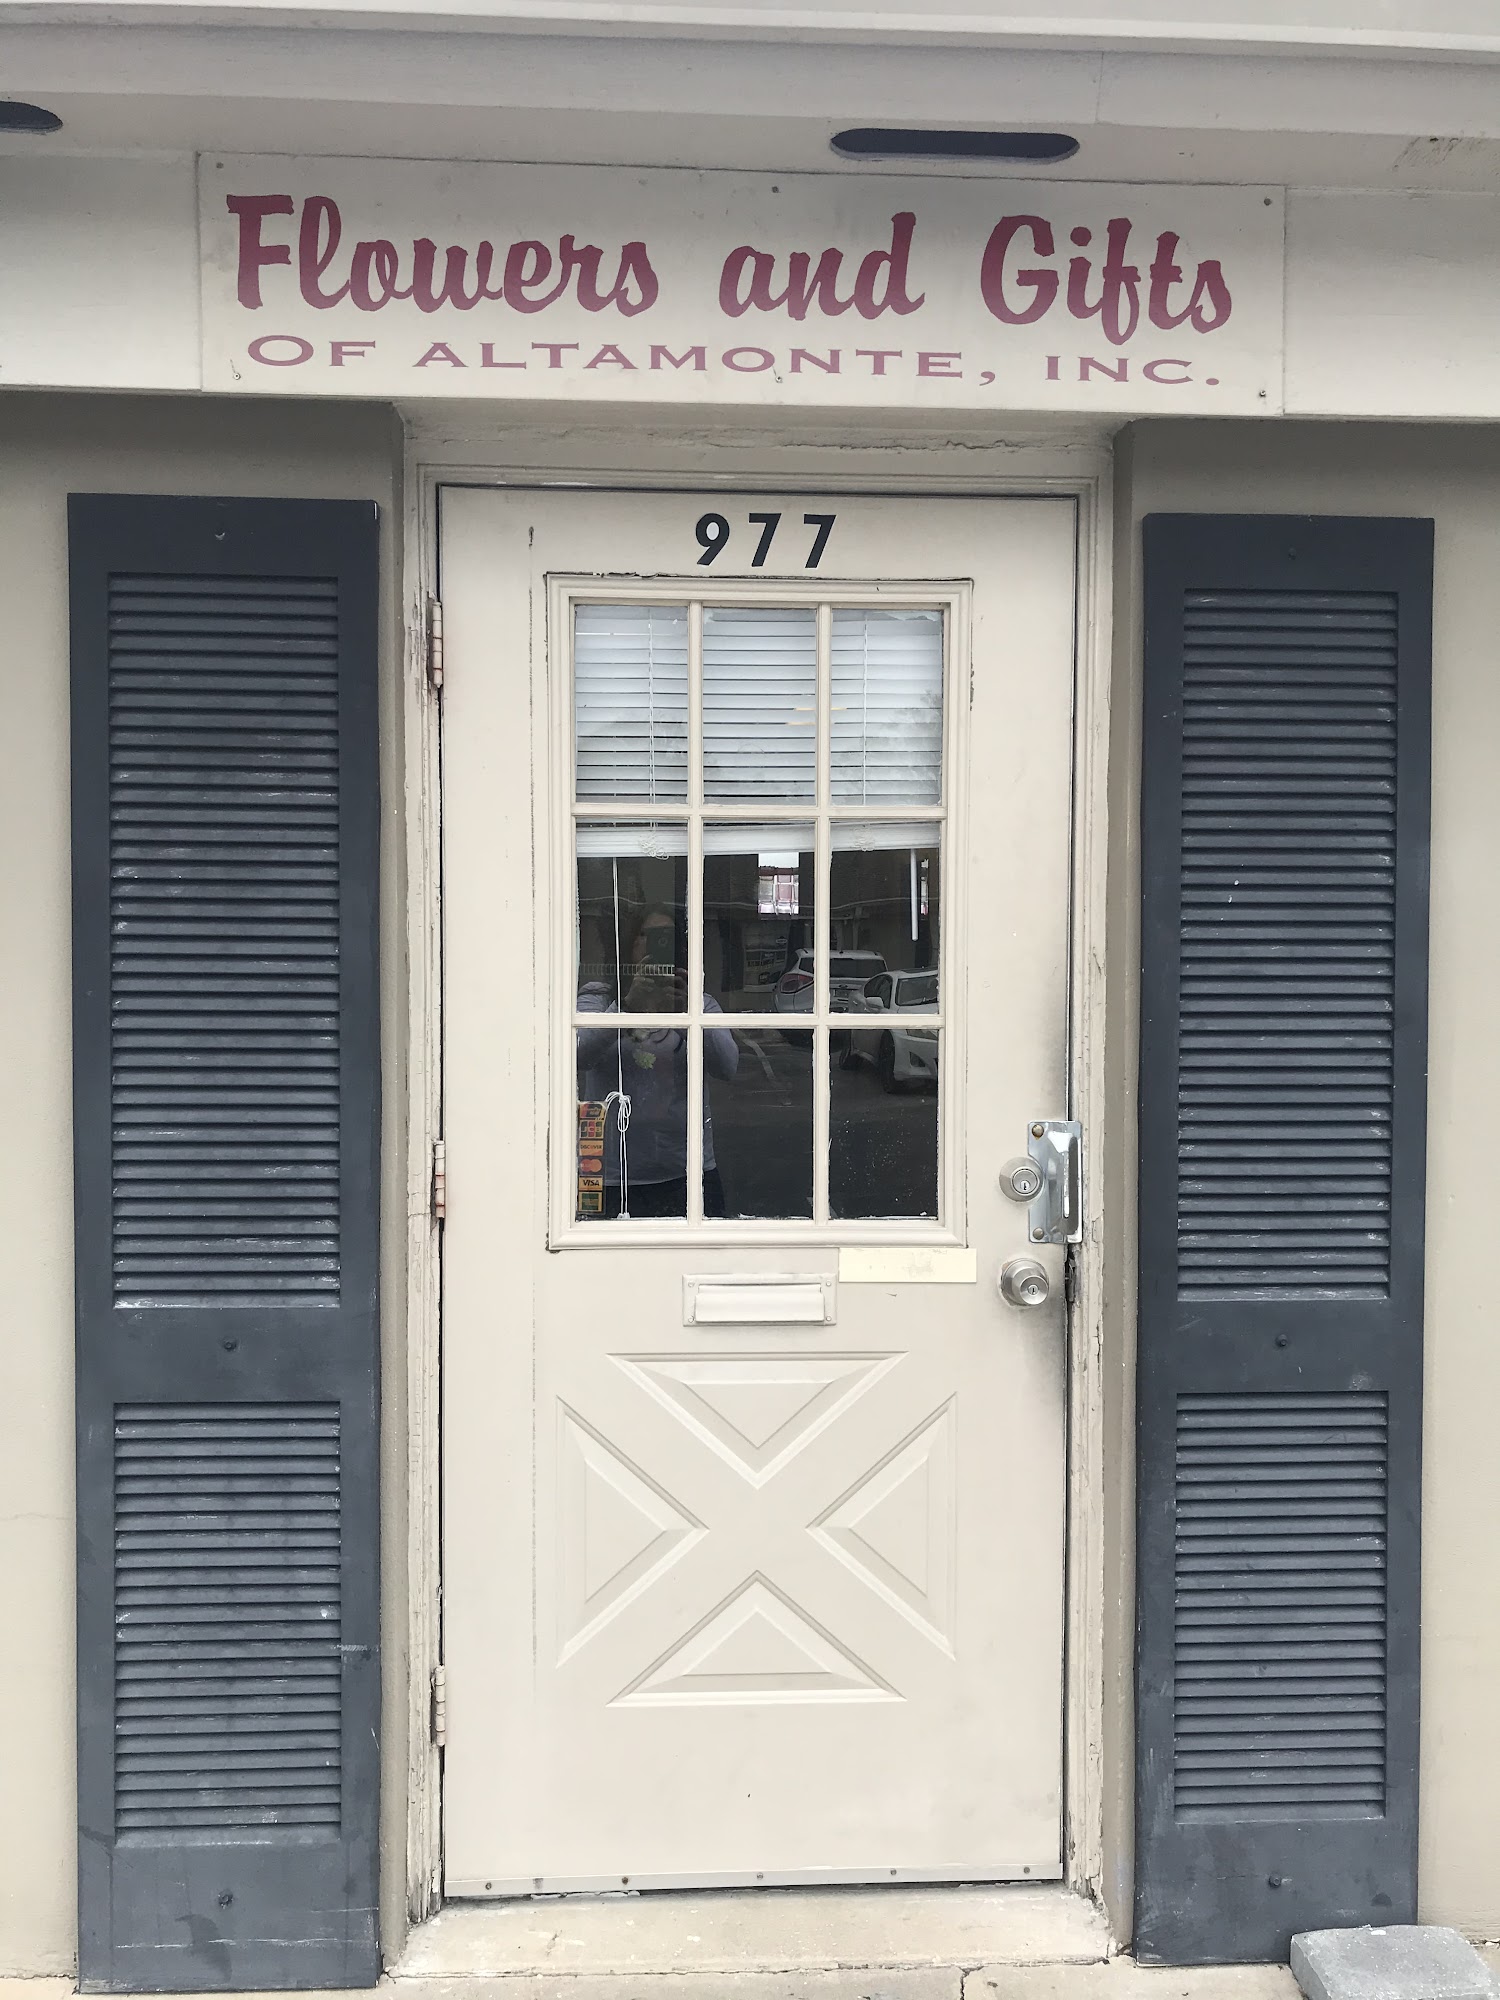 Flowers and Gifts of Altamonte